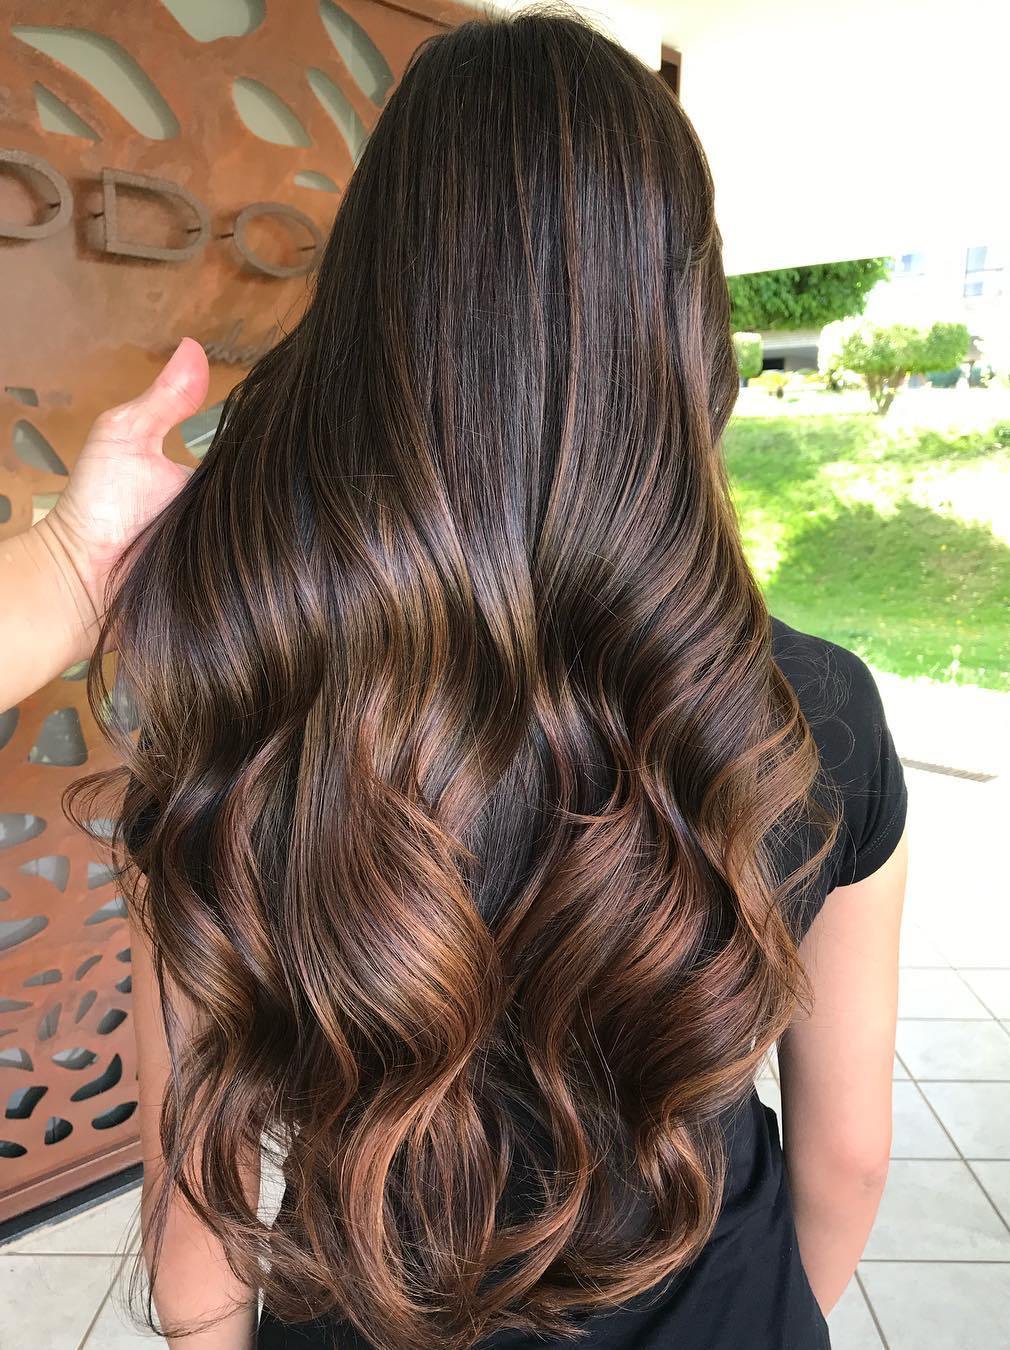 Long Brown Hair With Natural Looking Highlights